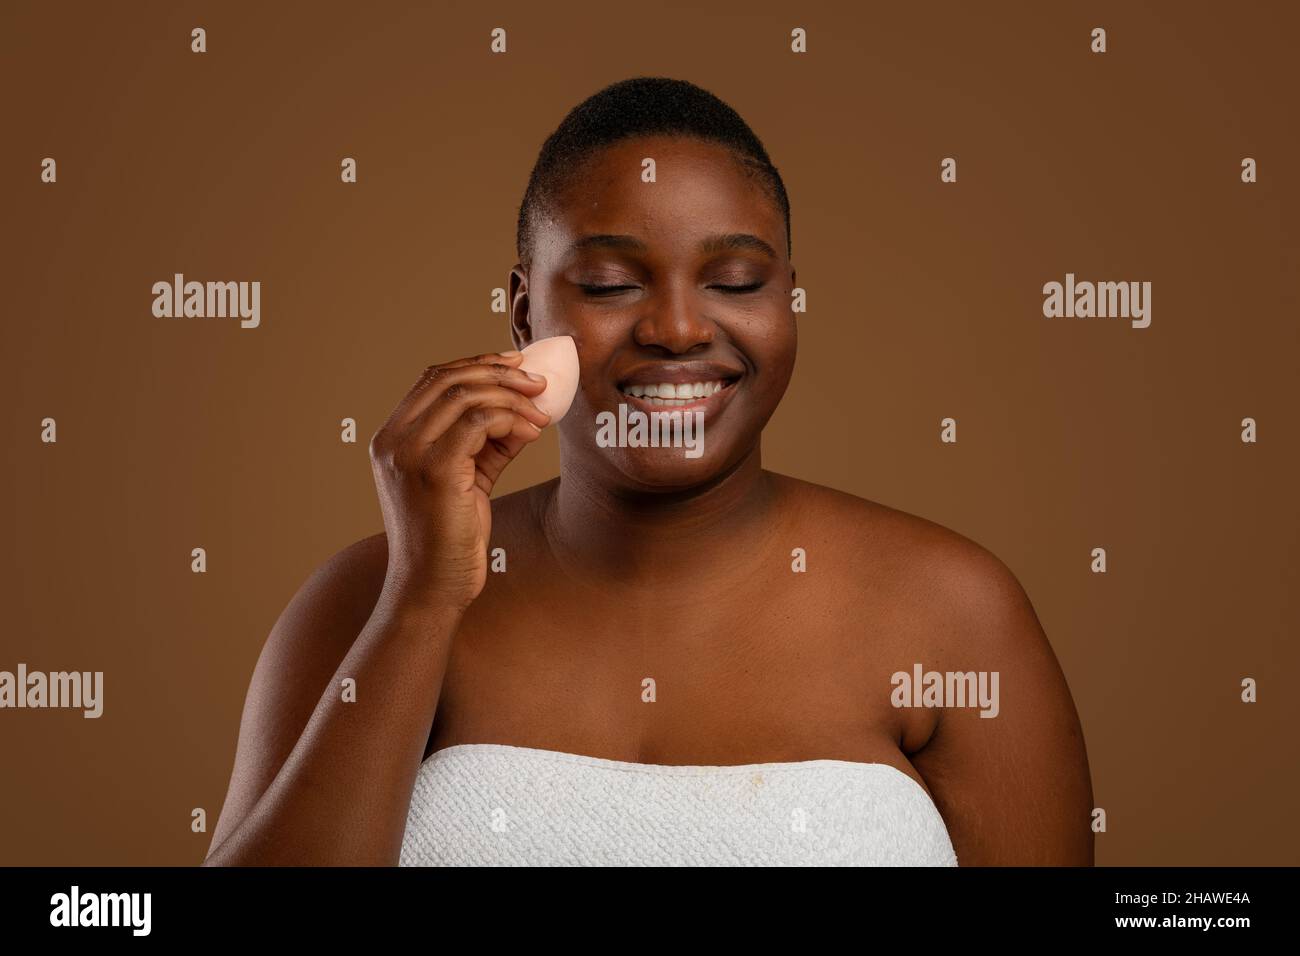 Black chubby woman with acne applying makeup with sponge Stock Photo